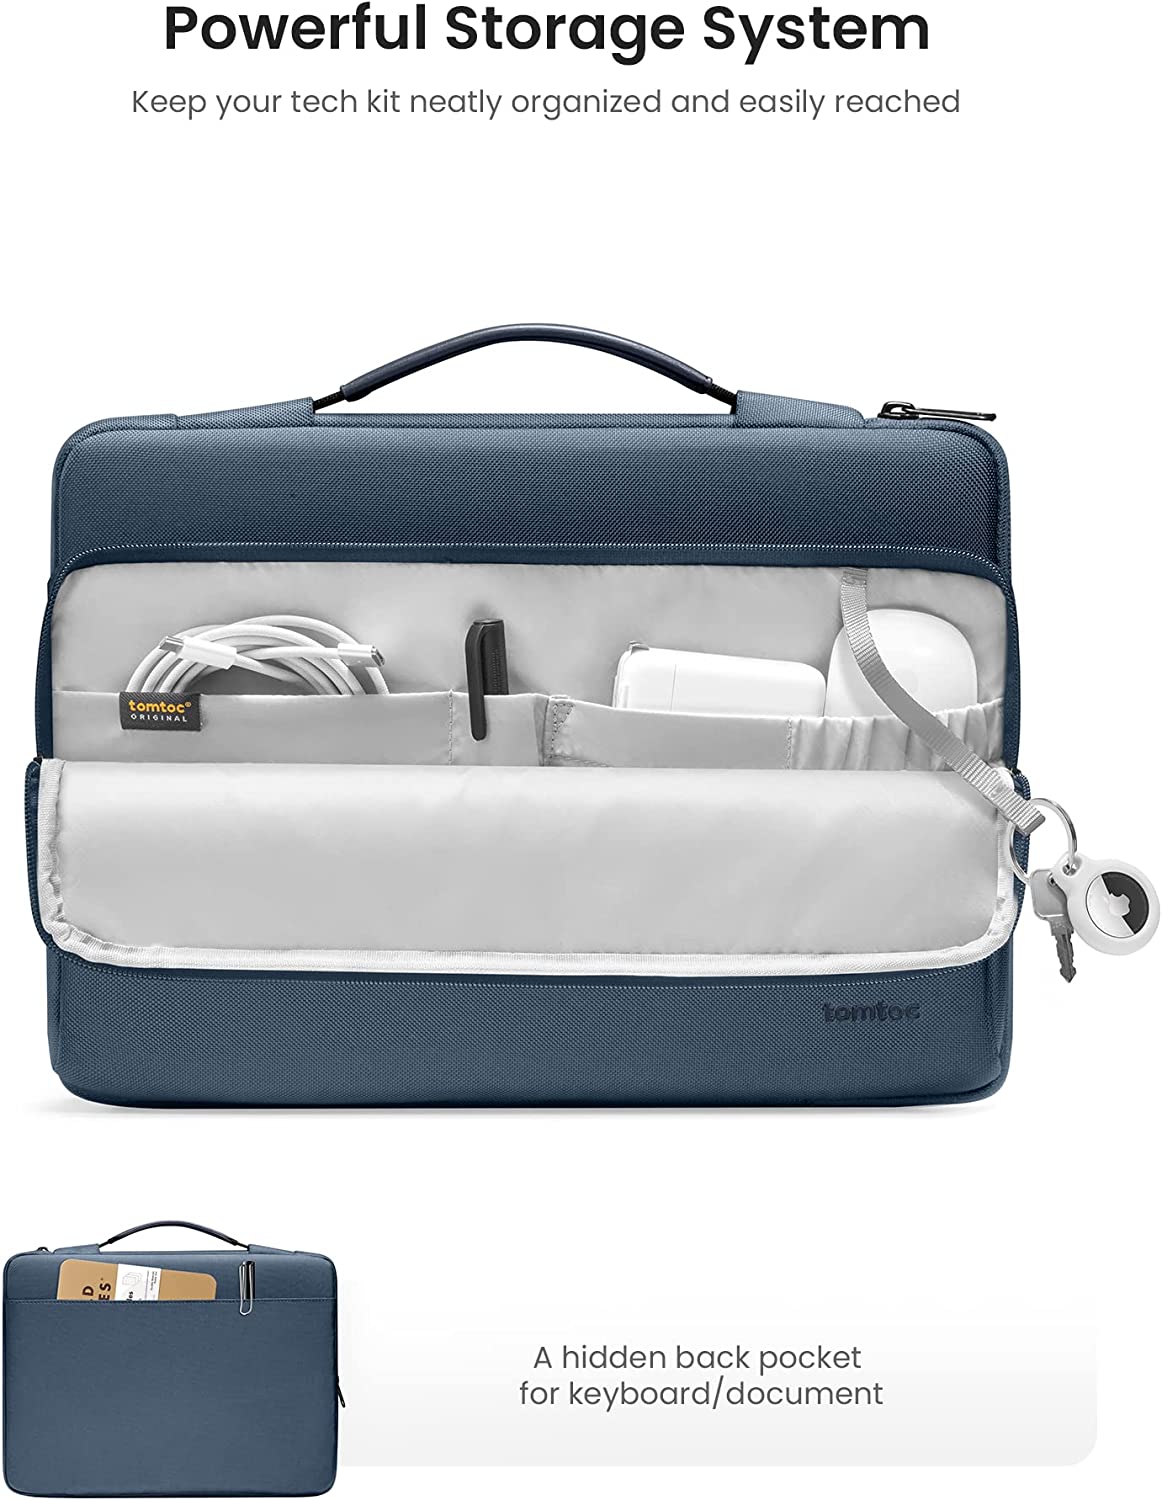 tomtoc 16 Inch Versatile 360 Protective Laptop Sleeve Briefcase - Navy Blue